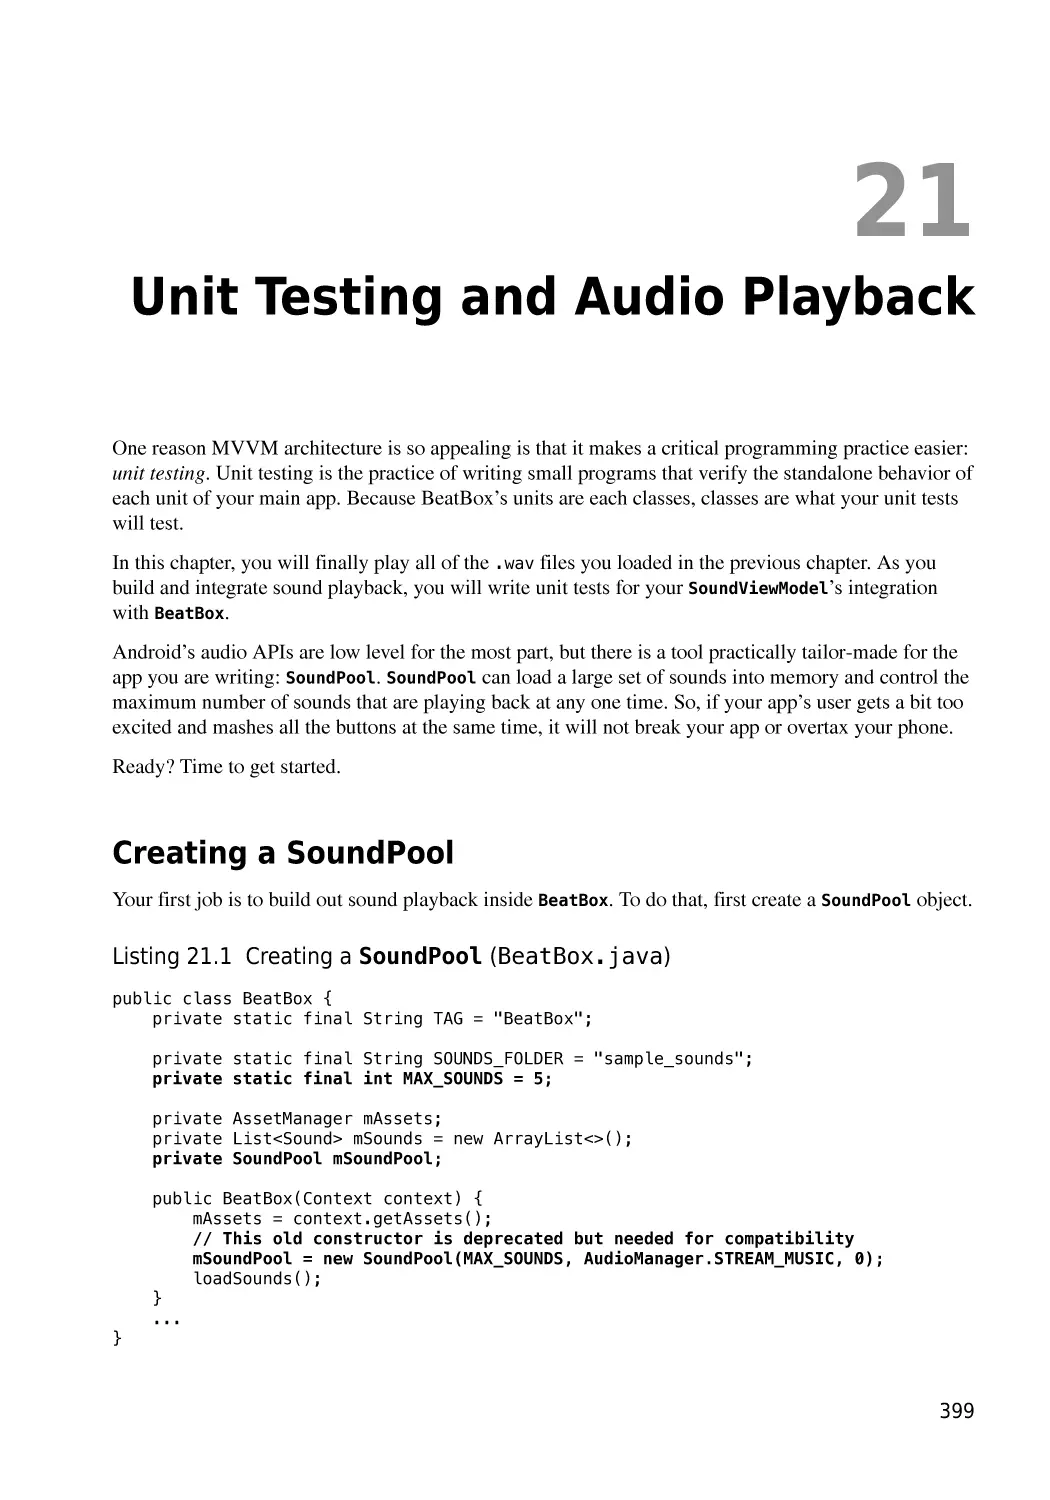 Chapter 21  Unit Testing and Audio Playback
Creating a SoundPool